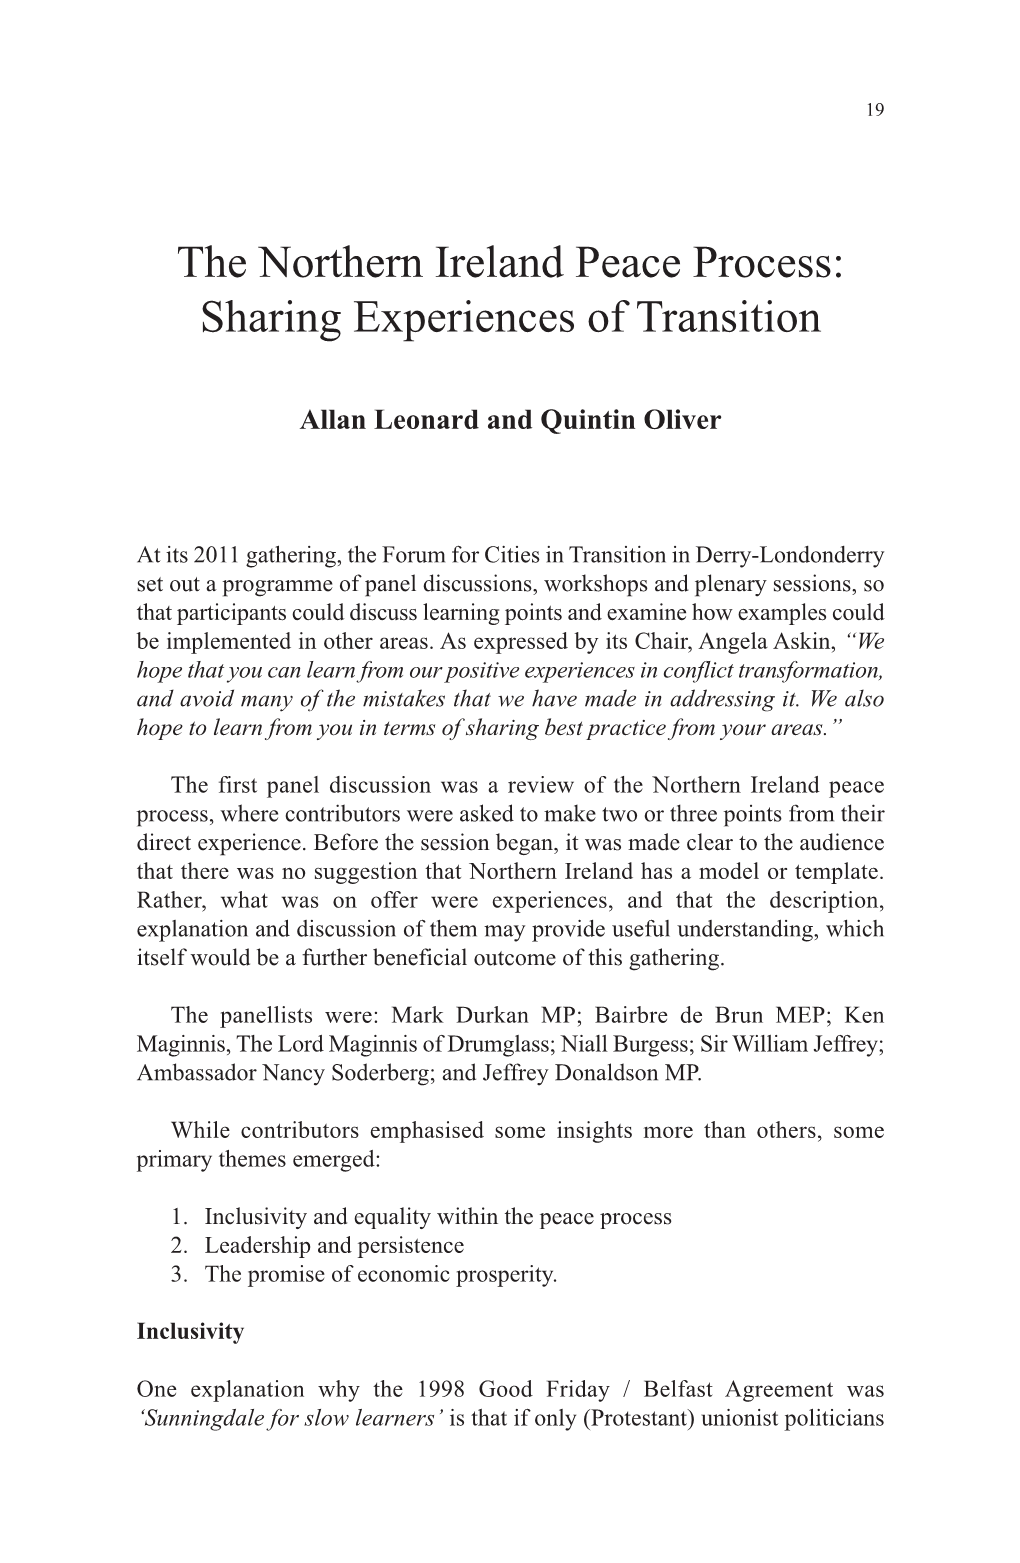 The Northern Ireland Peace Process: Sharing Experiences of Transition